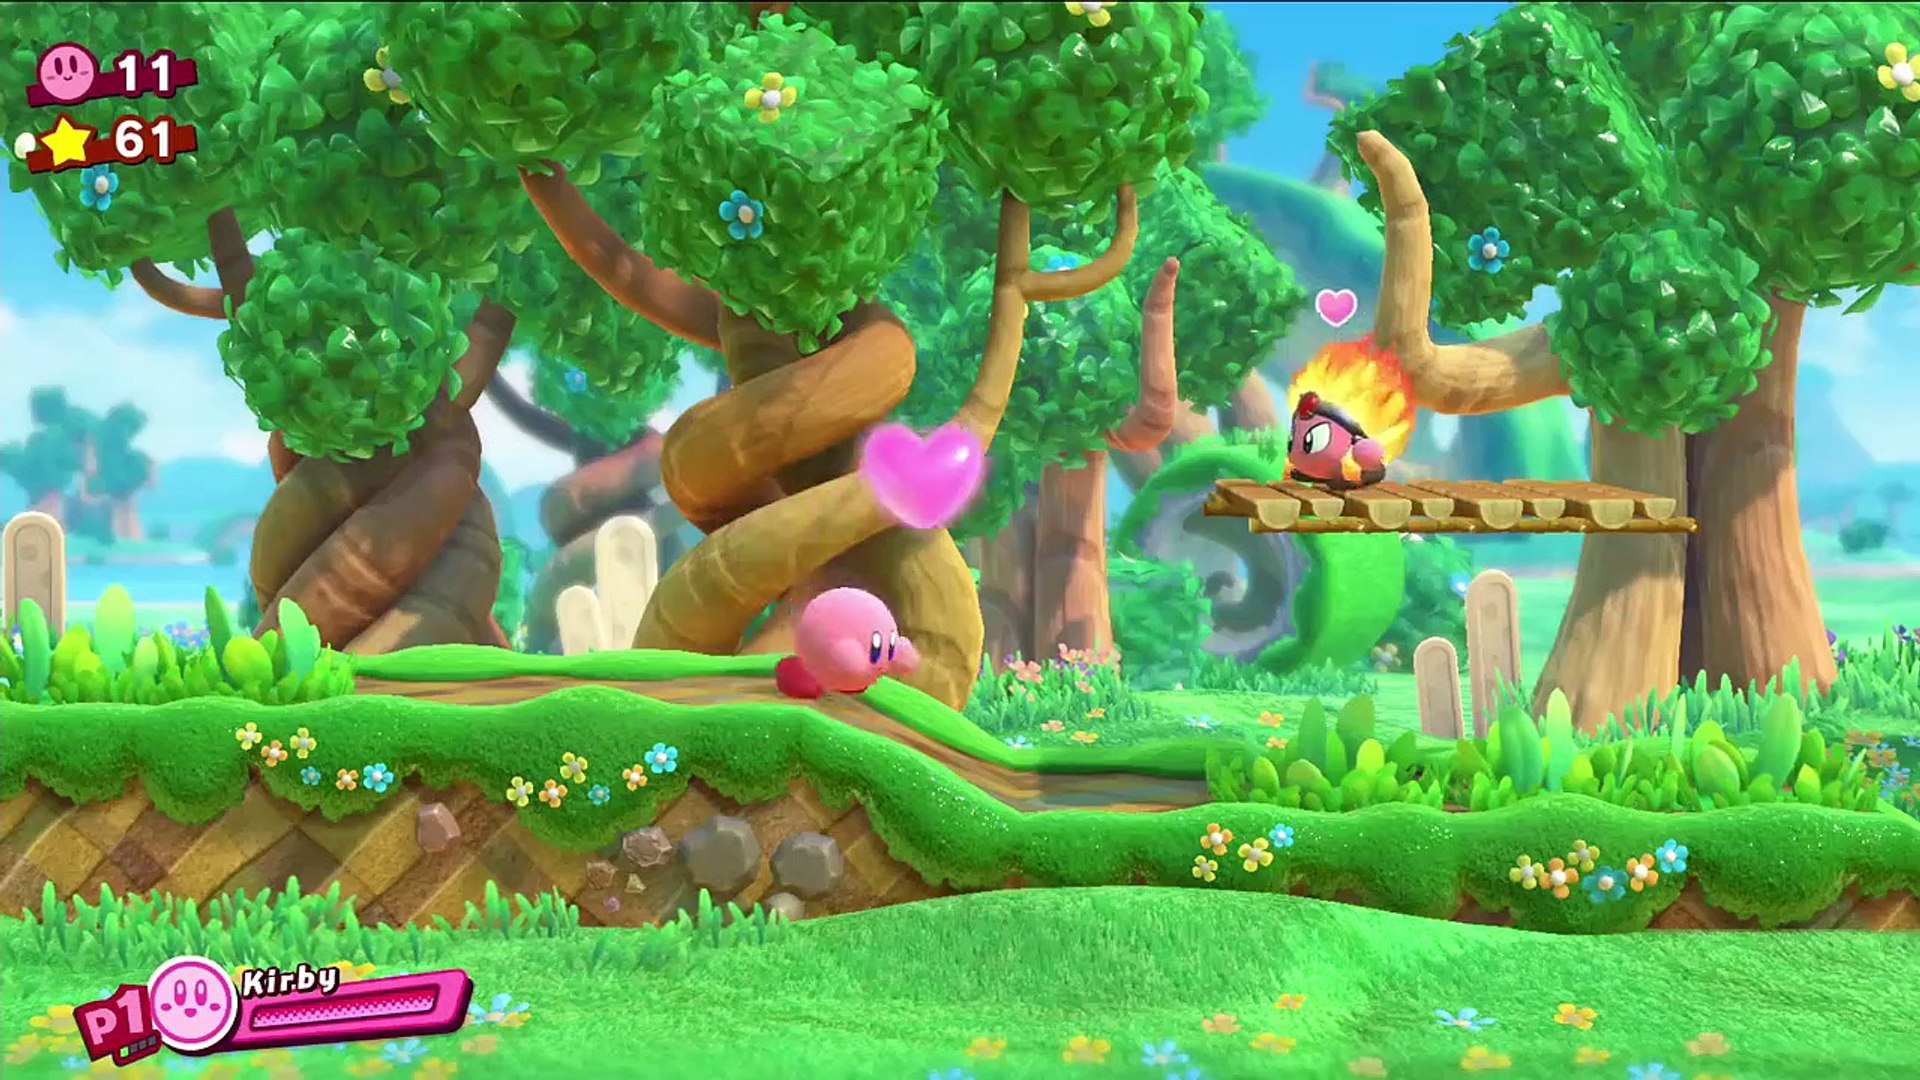 Kirby Star Allies Official Trailer - video Dailymotion